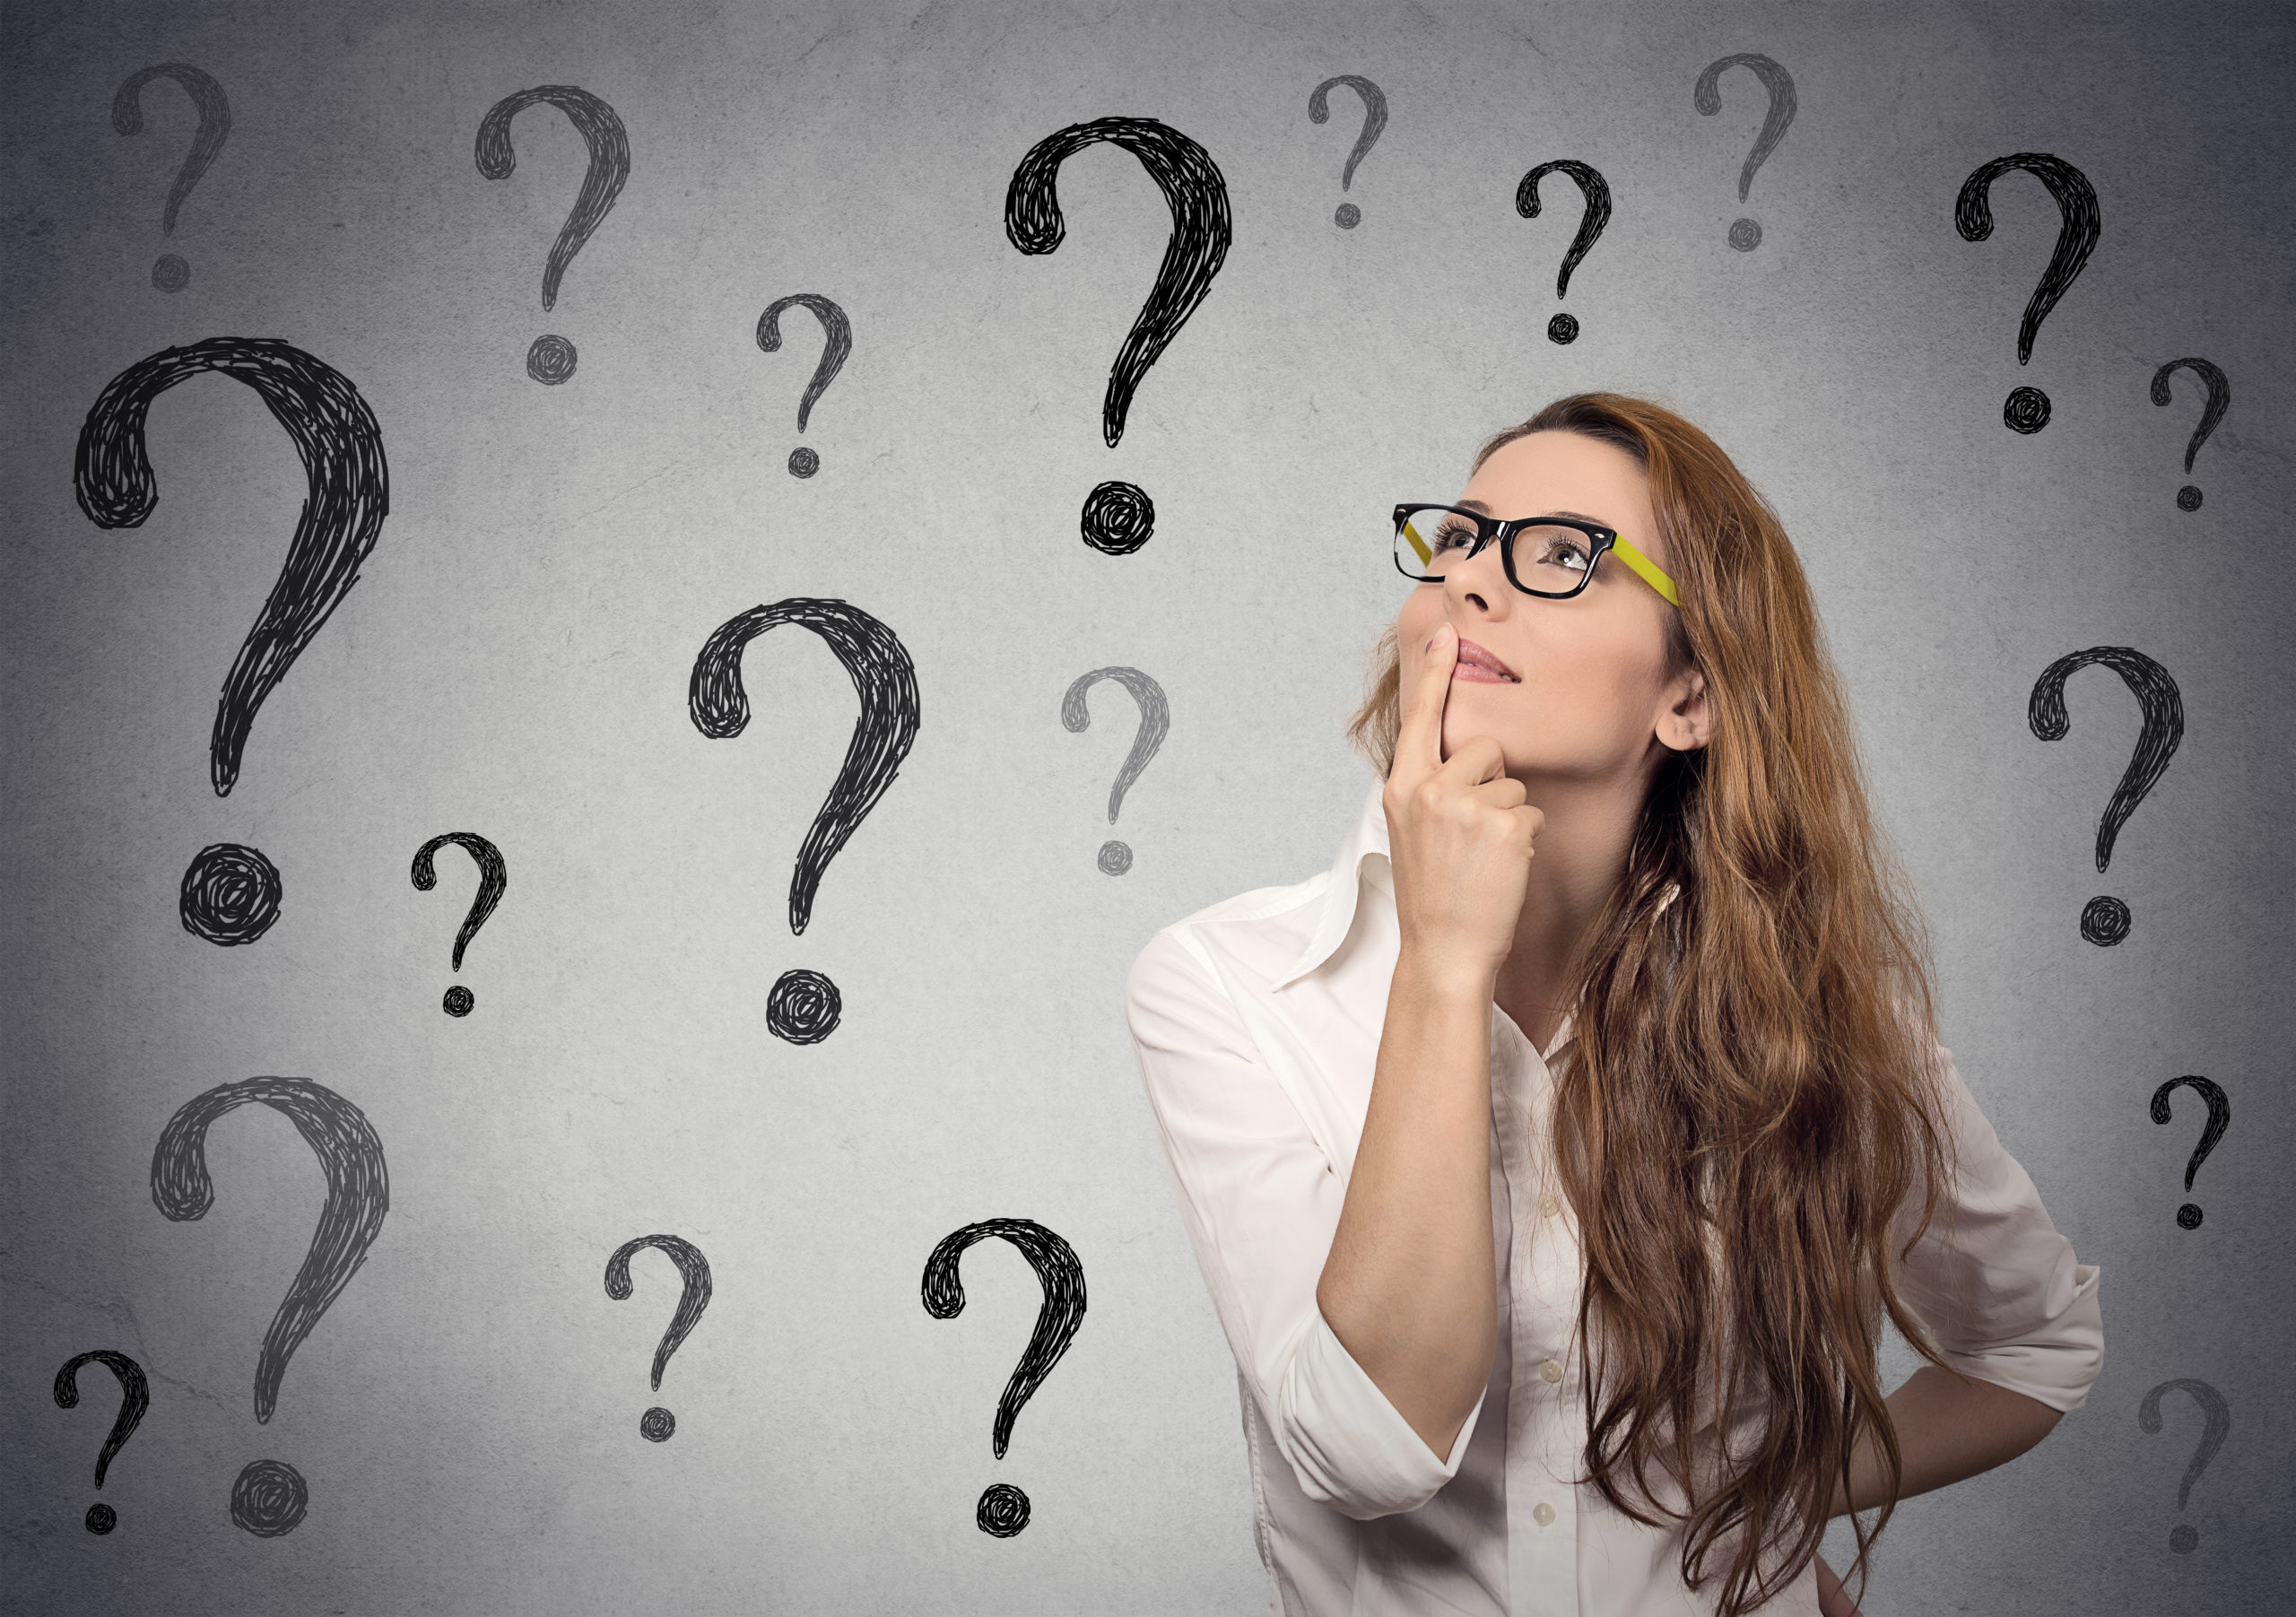 Questions to Ask Your New Digital Marketing Coach